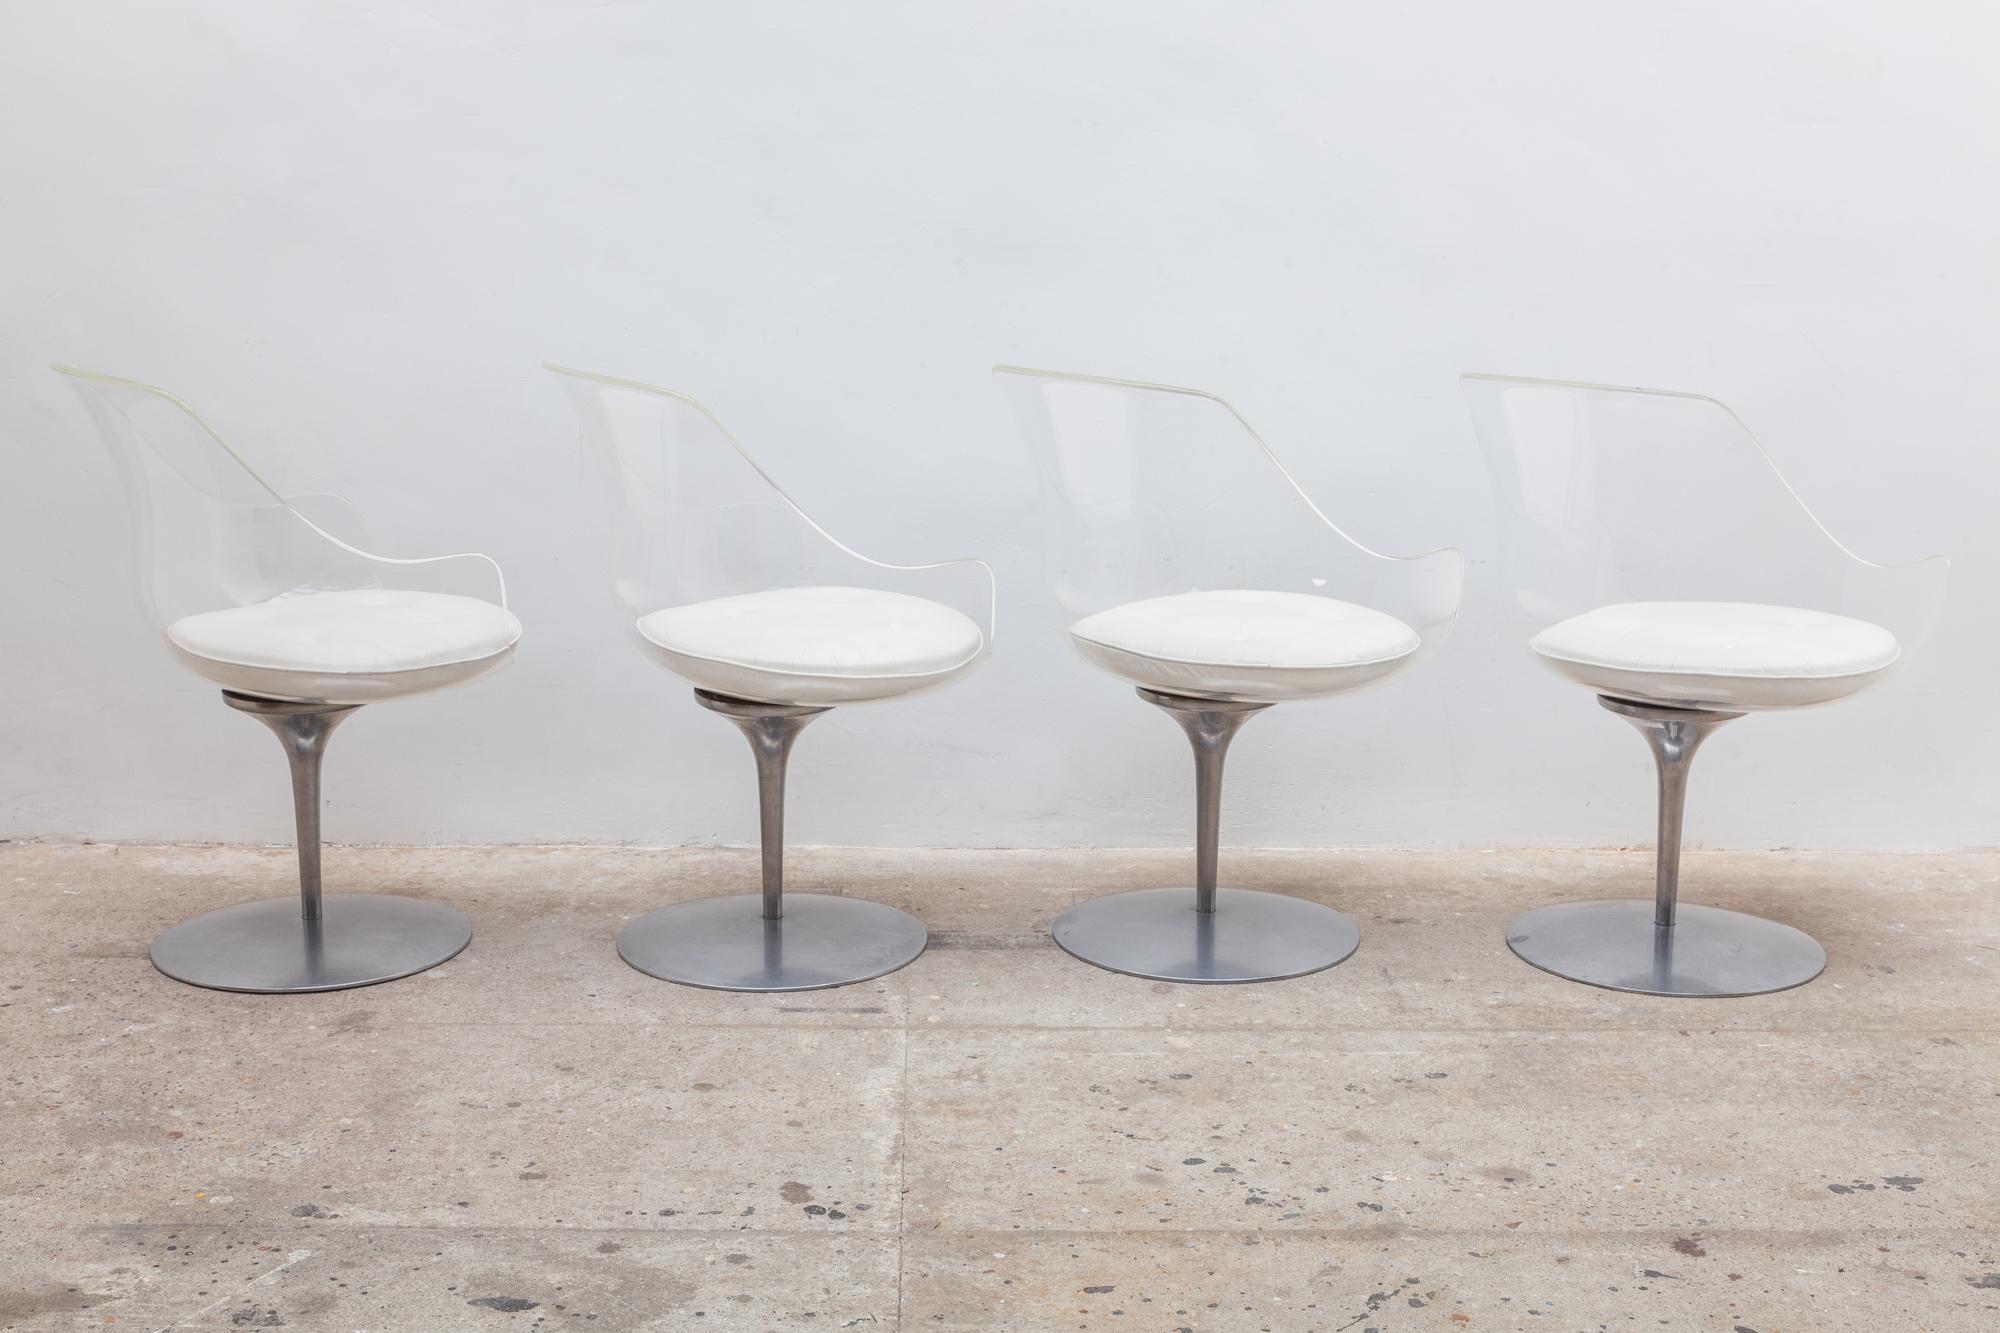 Vintage 1960s translucent Lucite bucket chairs. Tulip shaped polished cast aluminum base. Tufted white leather cushions attach with Velcro. The chairs can swivel and return to center. Dimensions: 60 W x 81 H x 60 D cm. Seat 46cm high. This set of